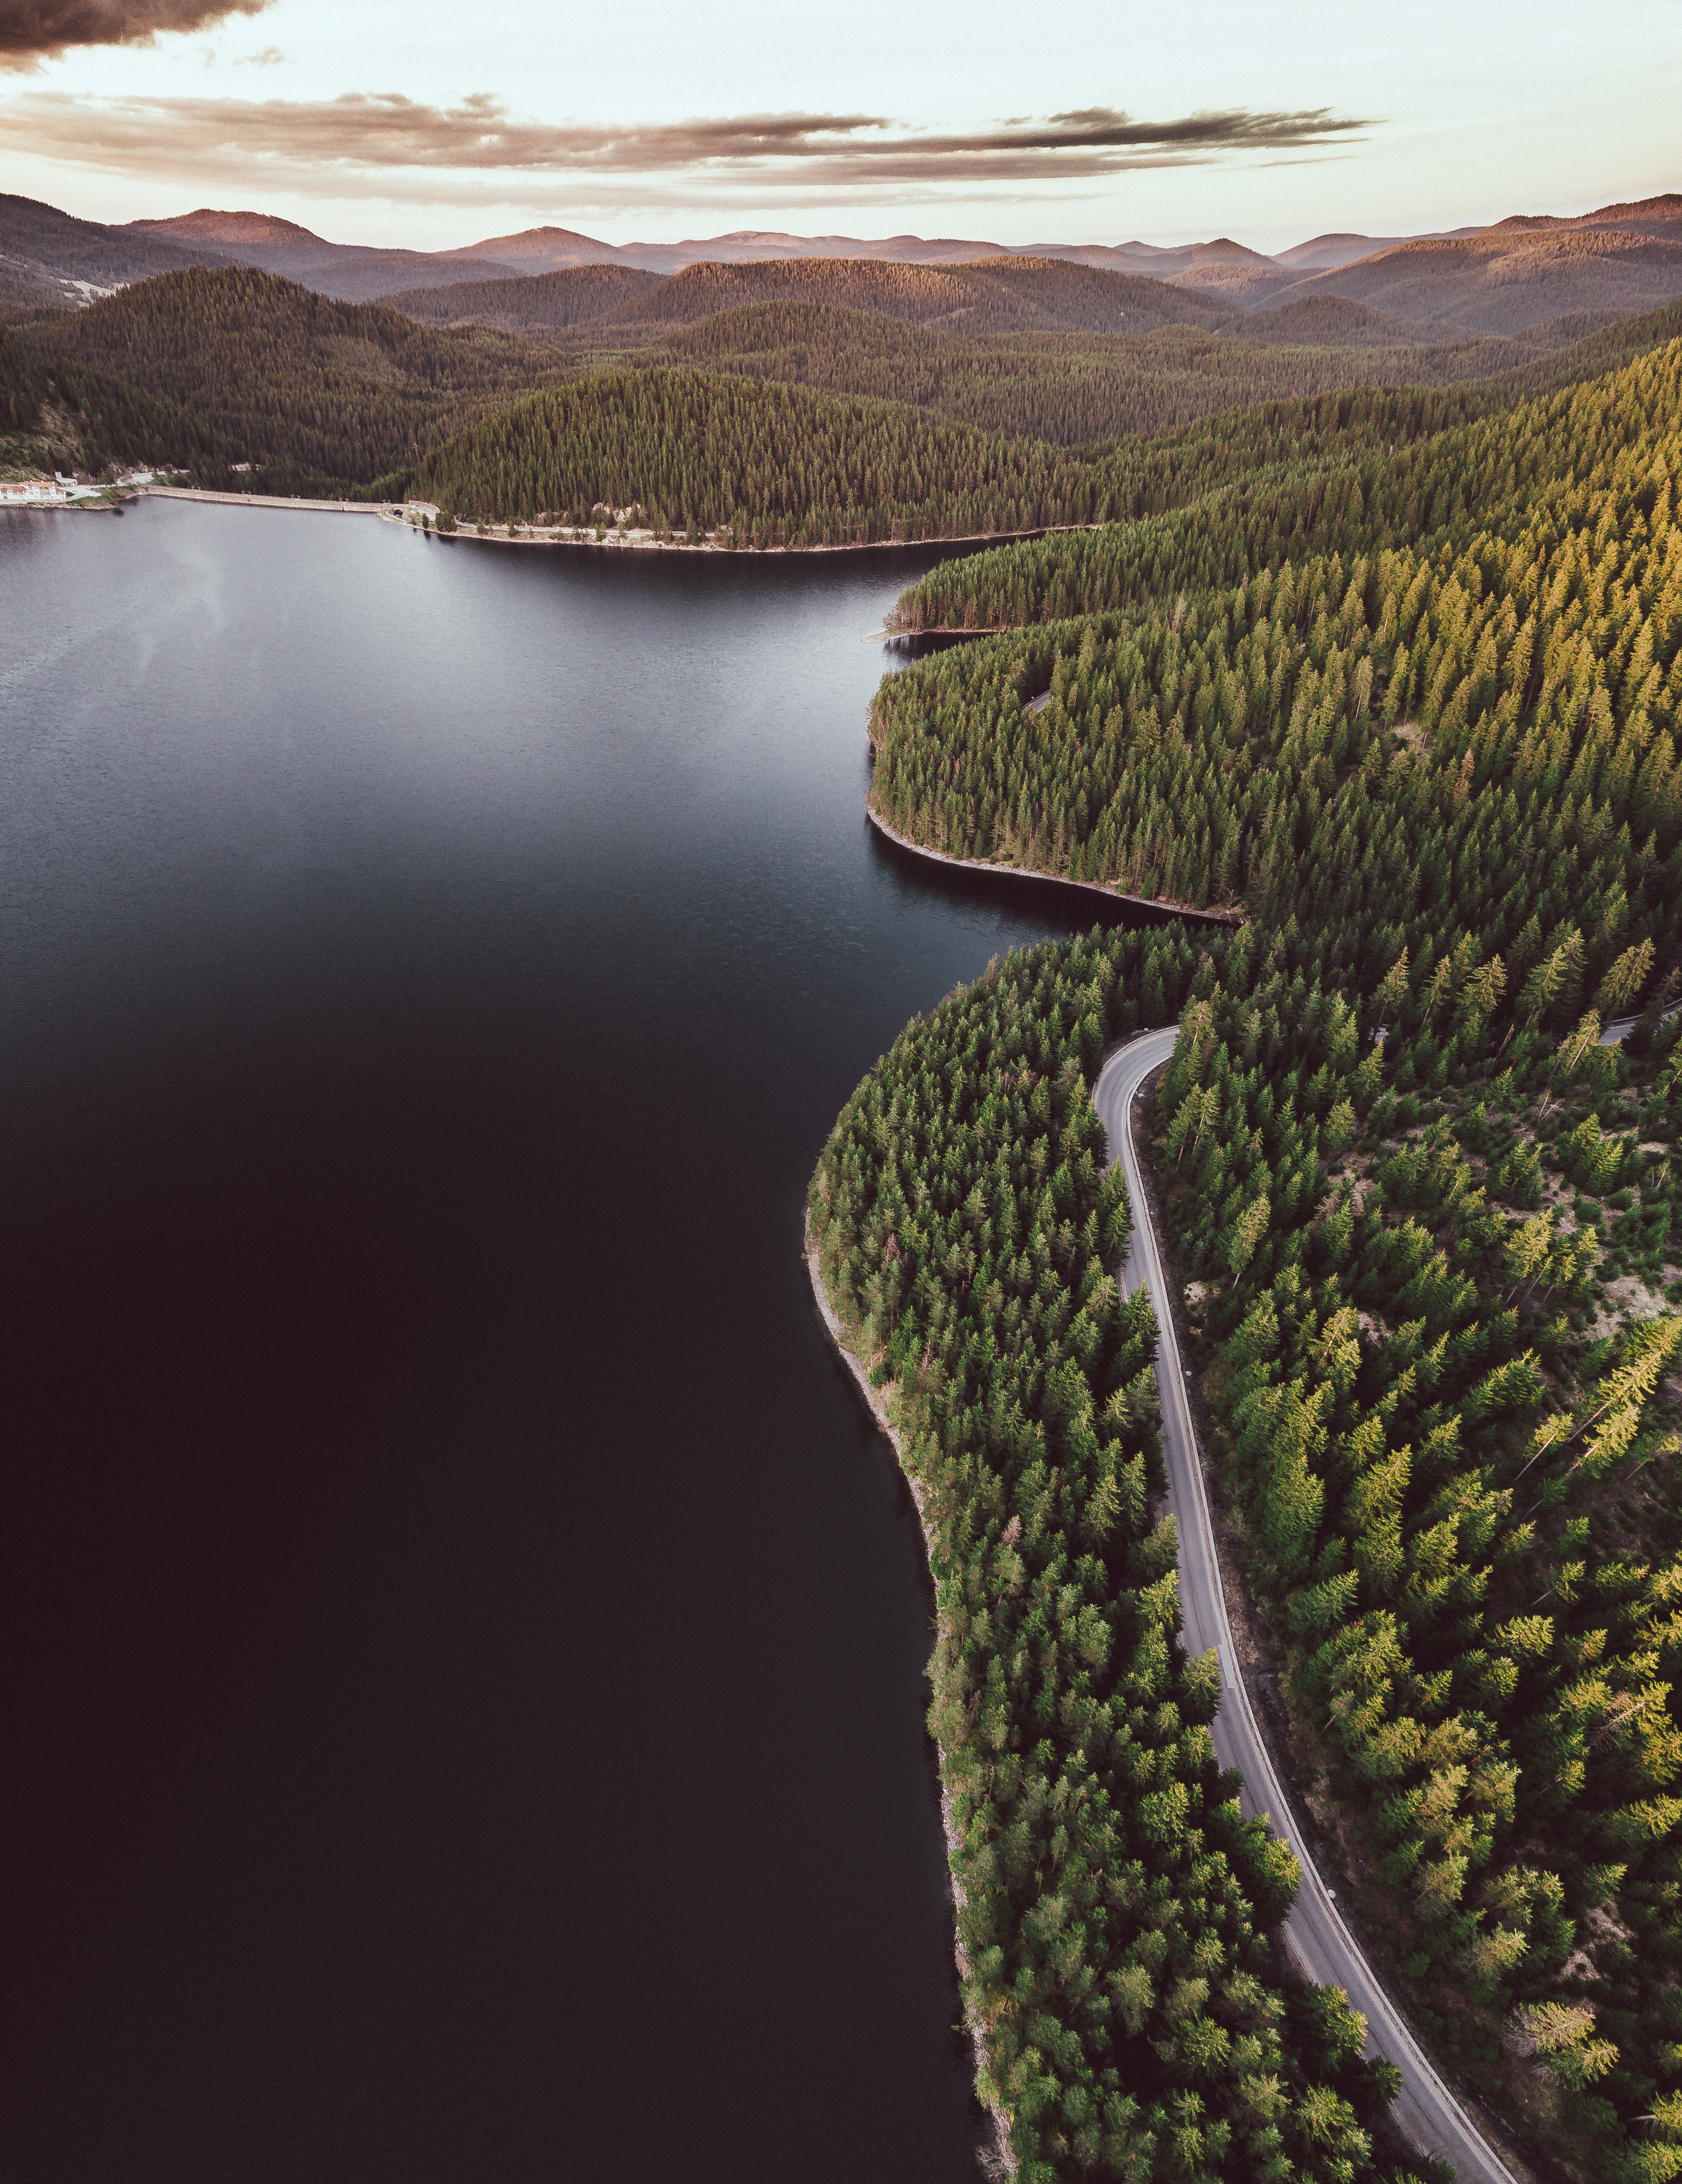 shore, nature, view from above, lake, bank, road, forest, hills cellphone